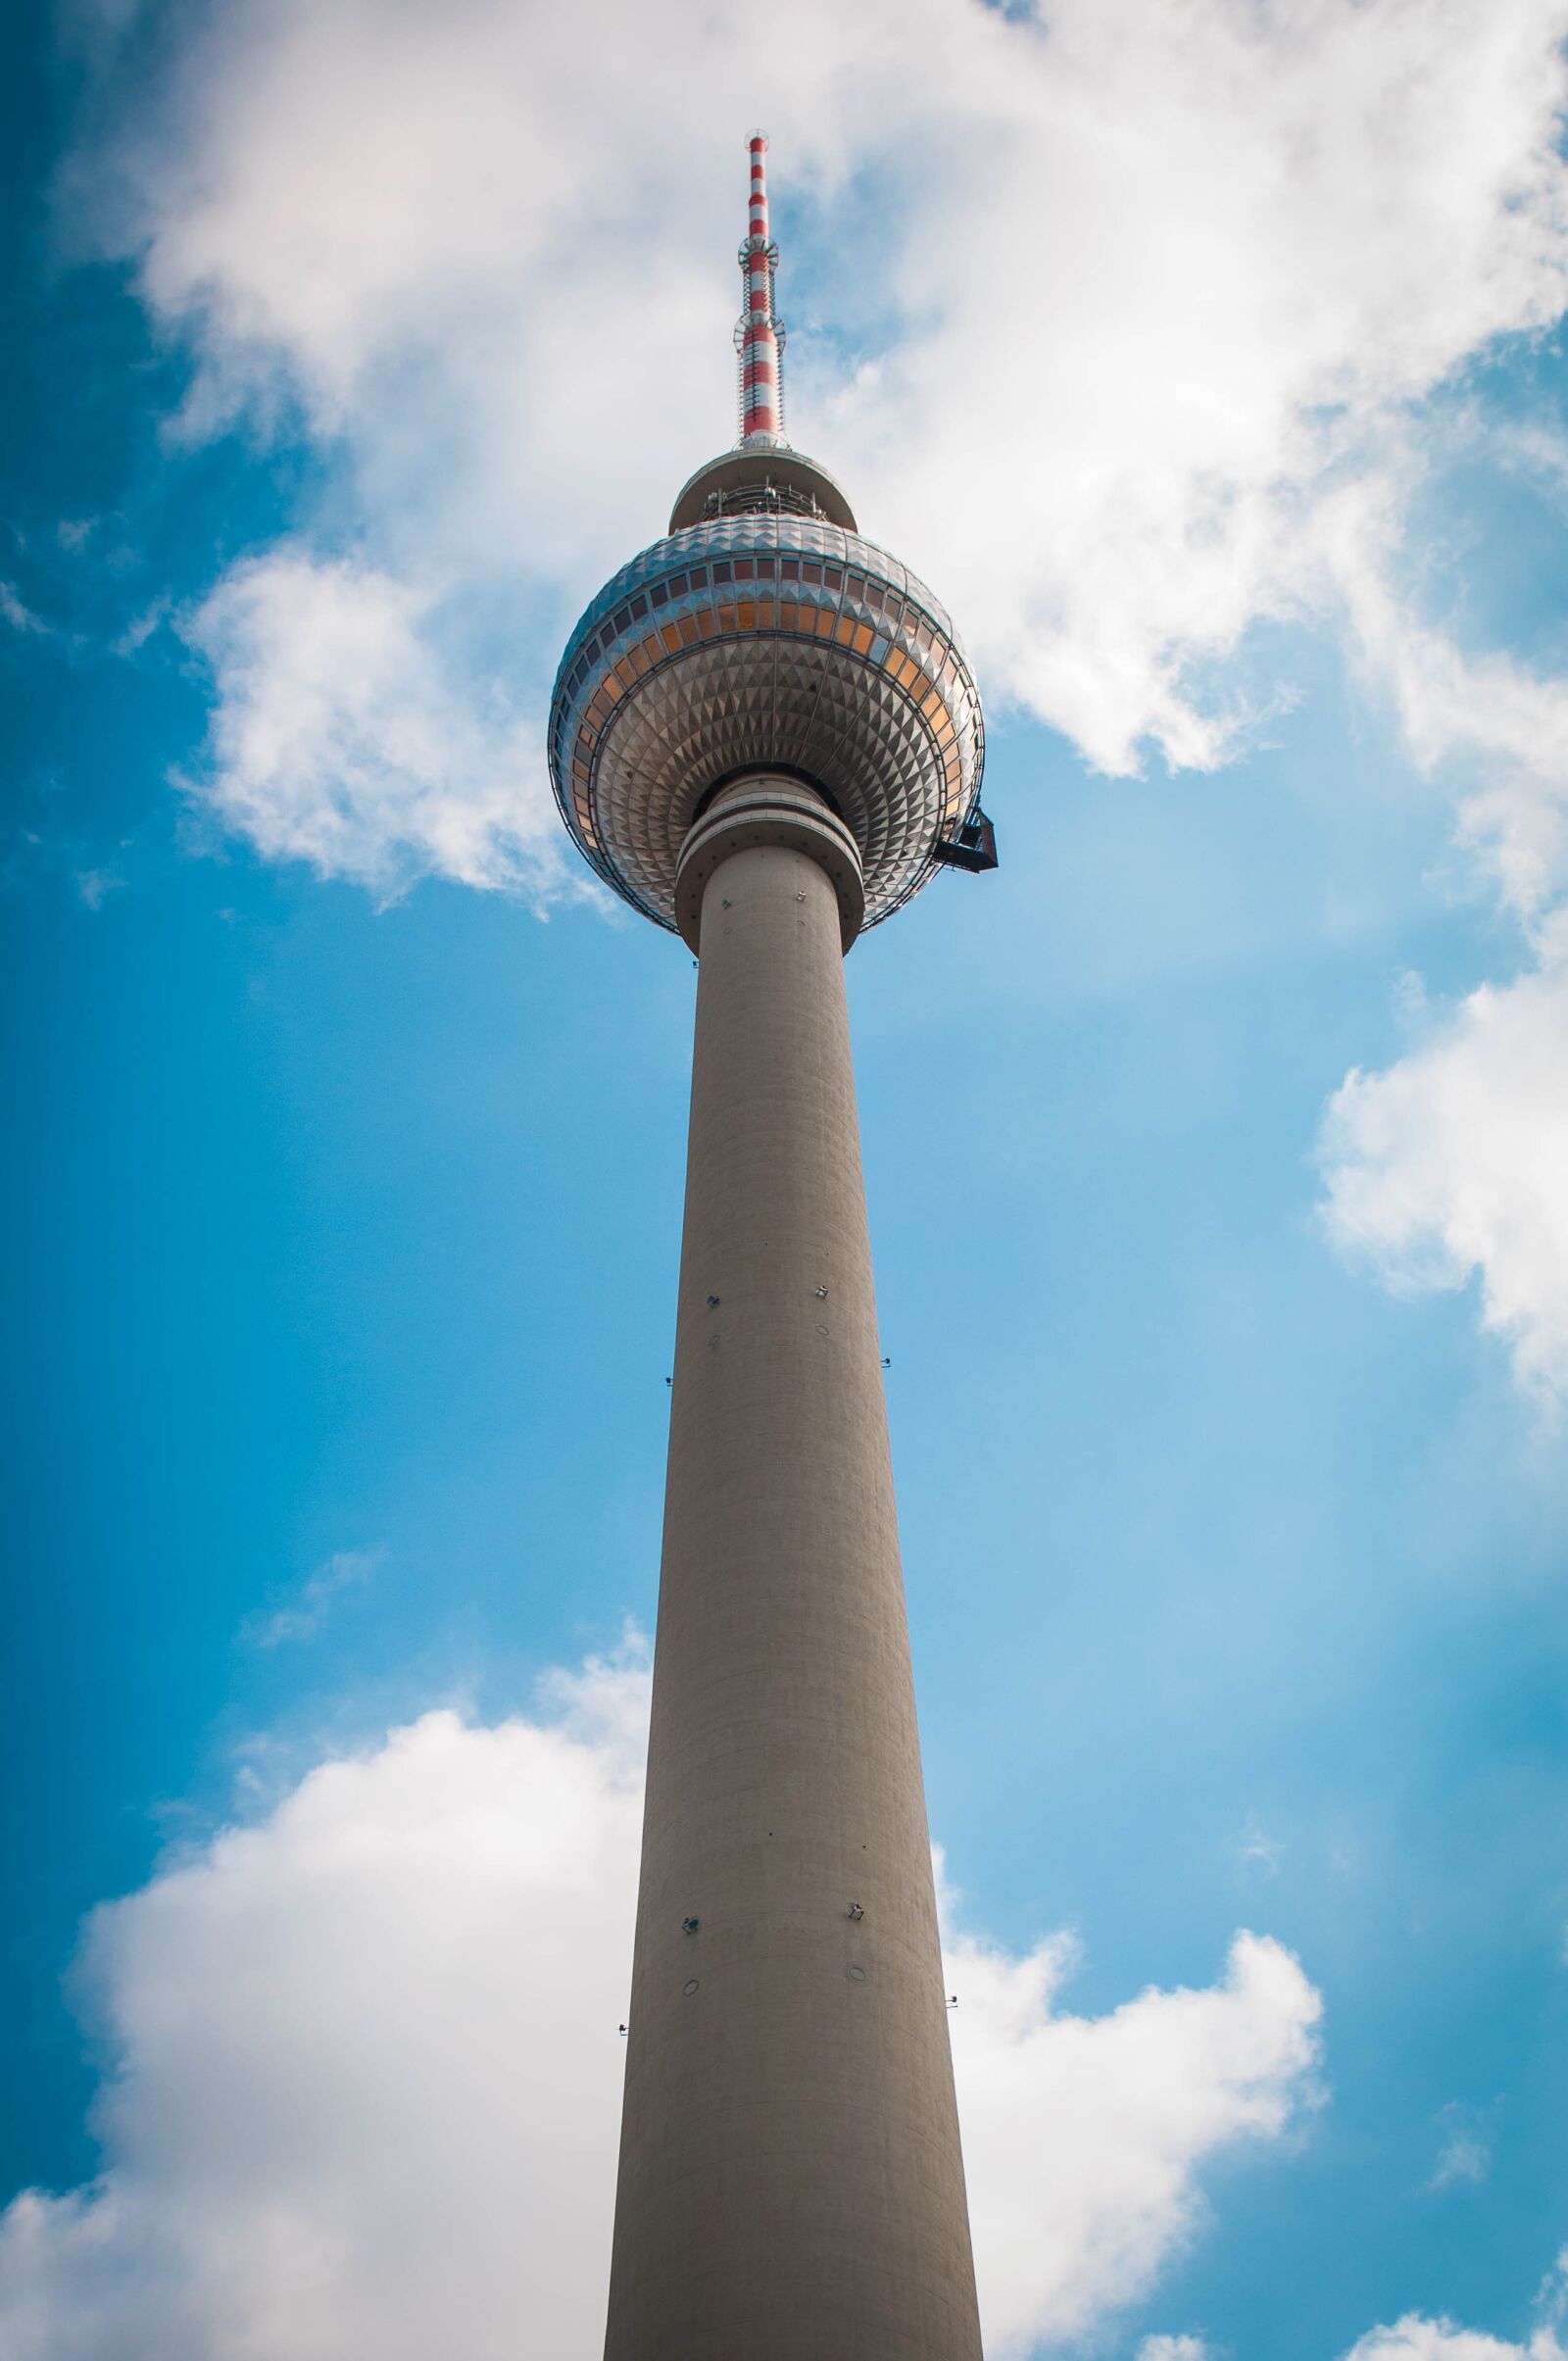 Nikon D90 sample photo. Architecture, sky, tower photography